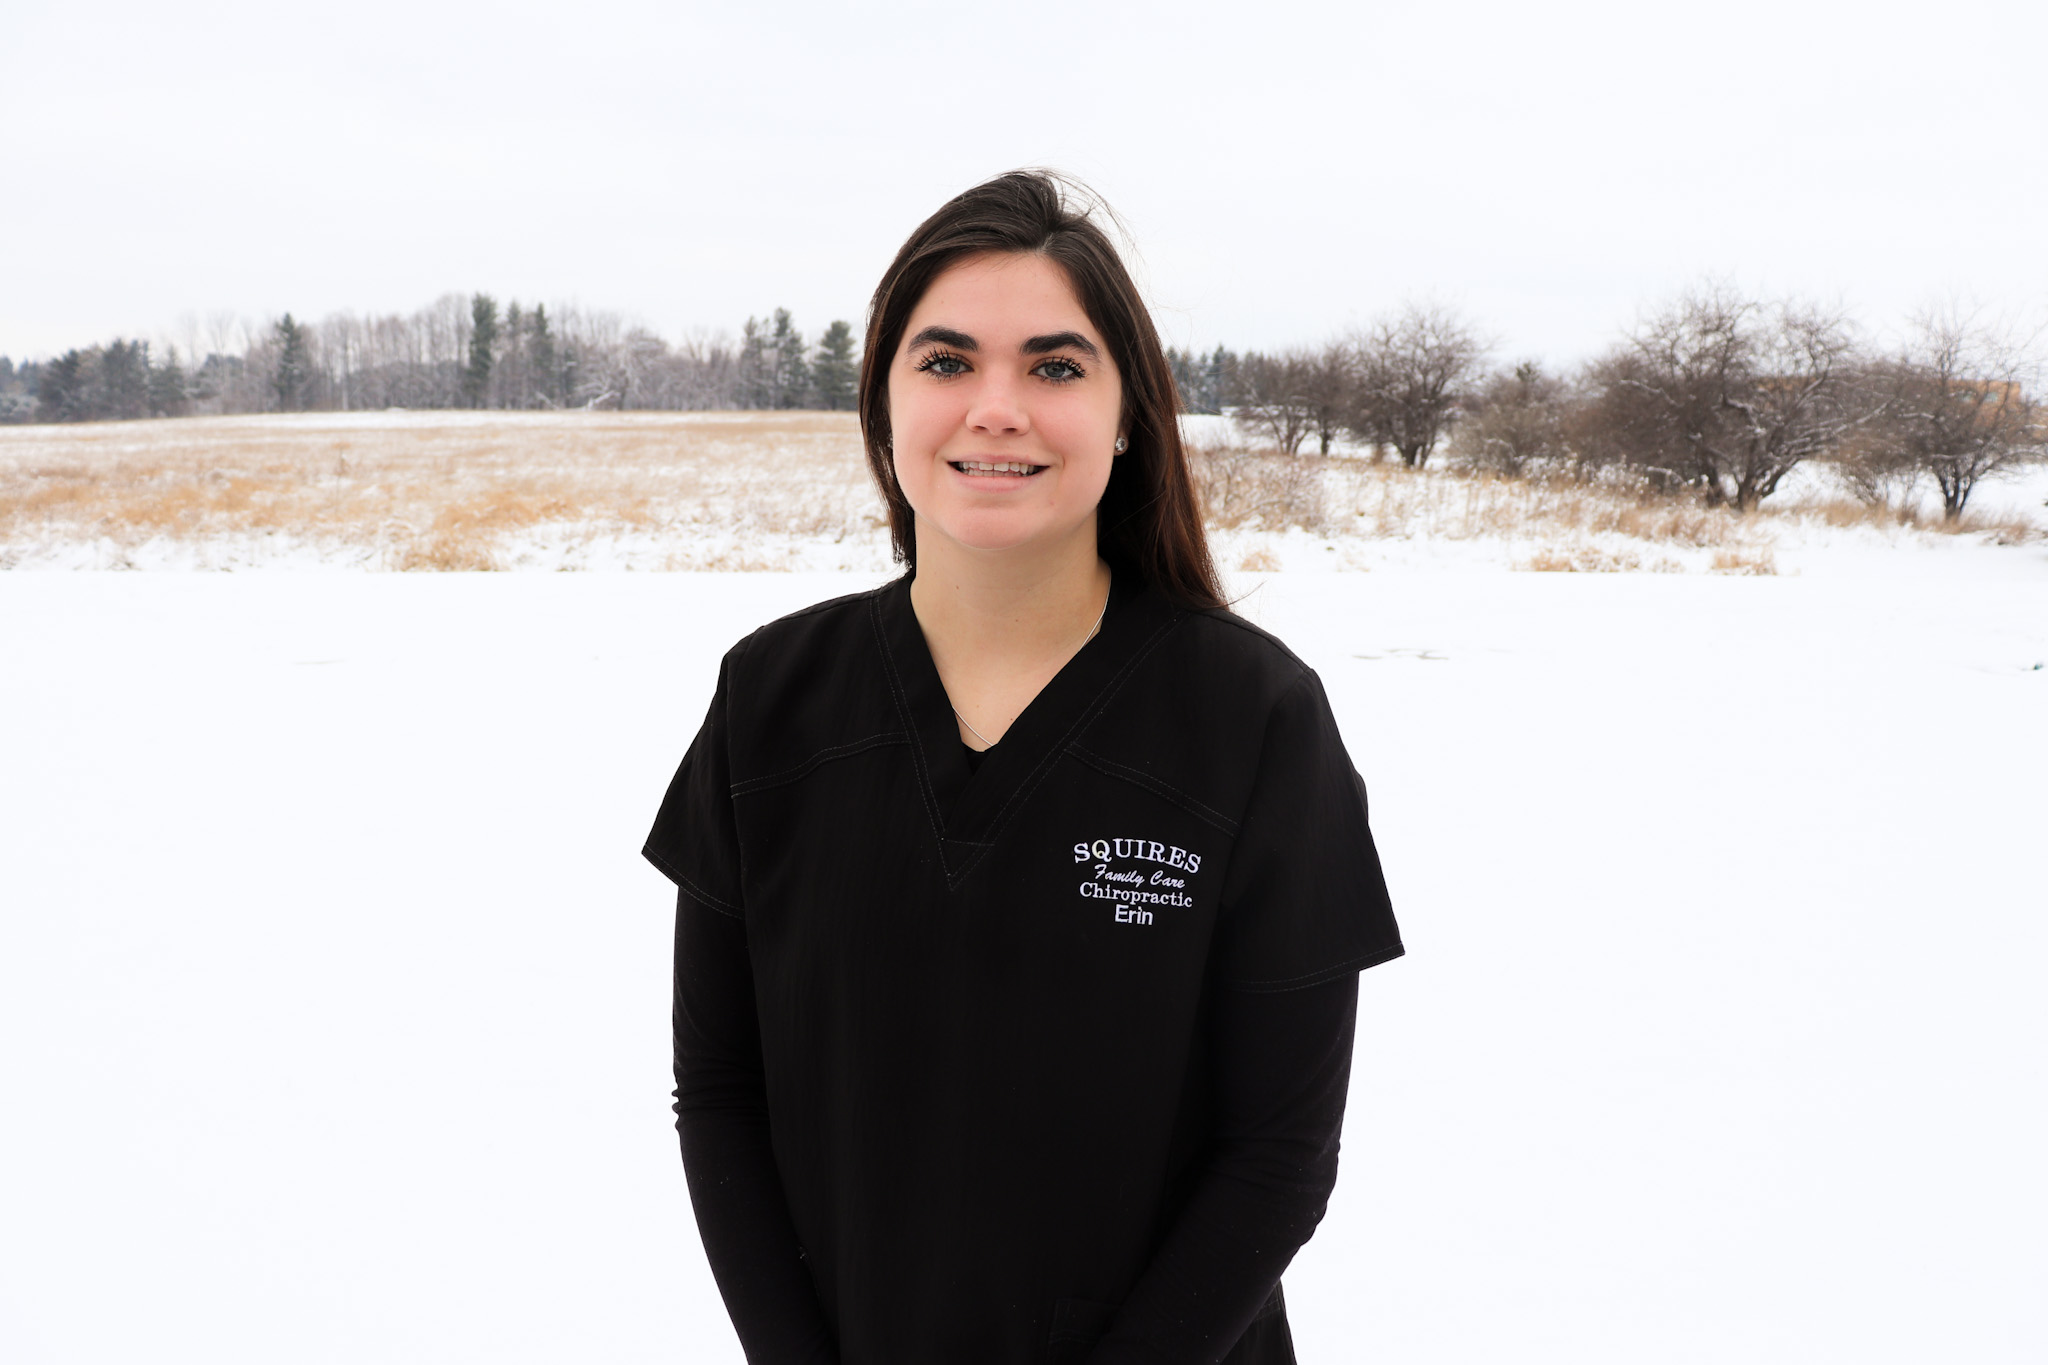 Erin from Squires Chiropractic - Scottville, Michigan